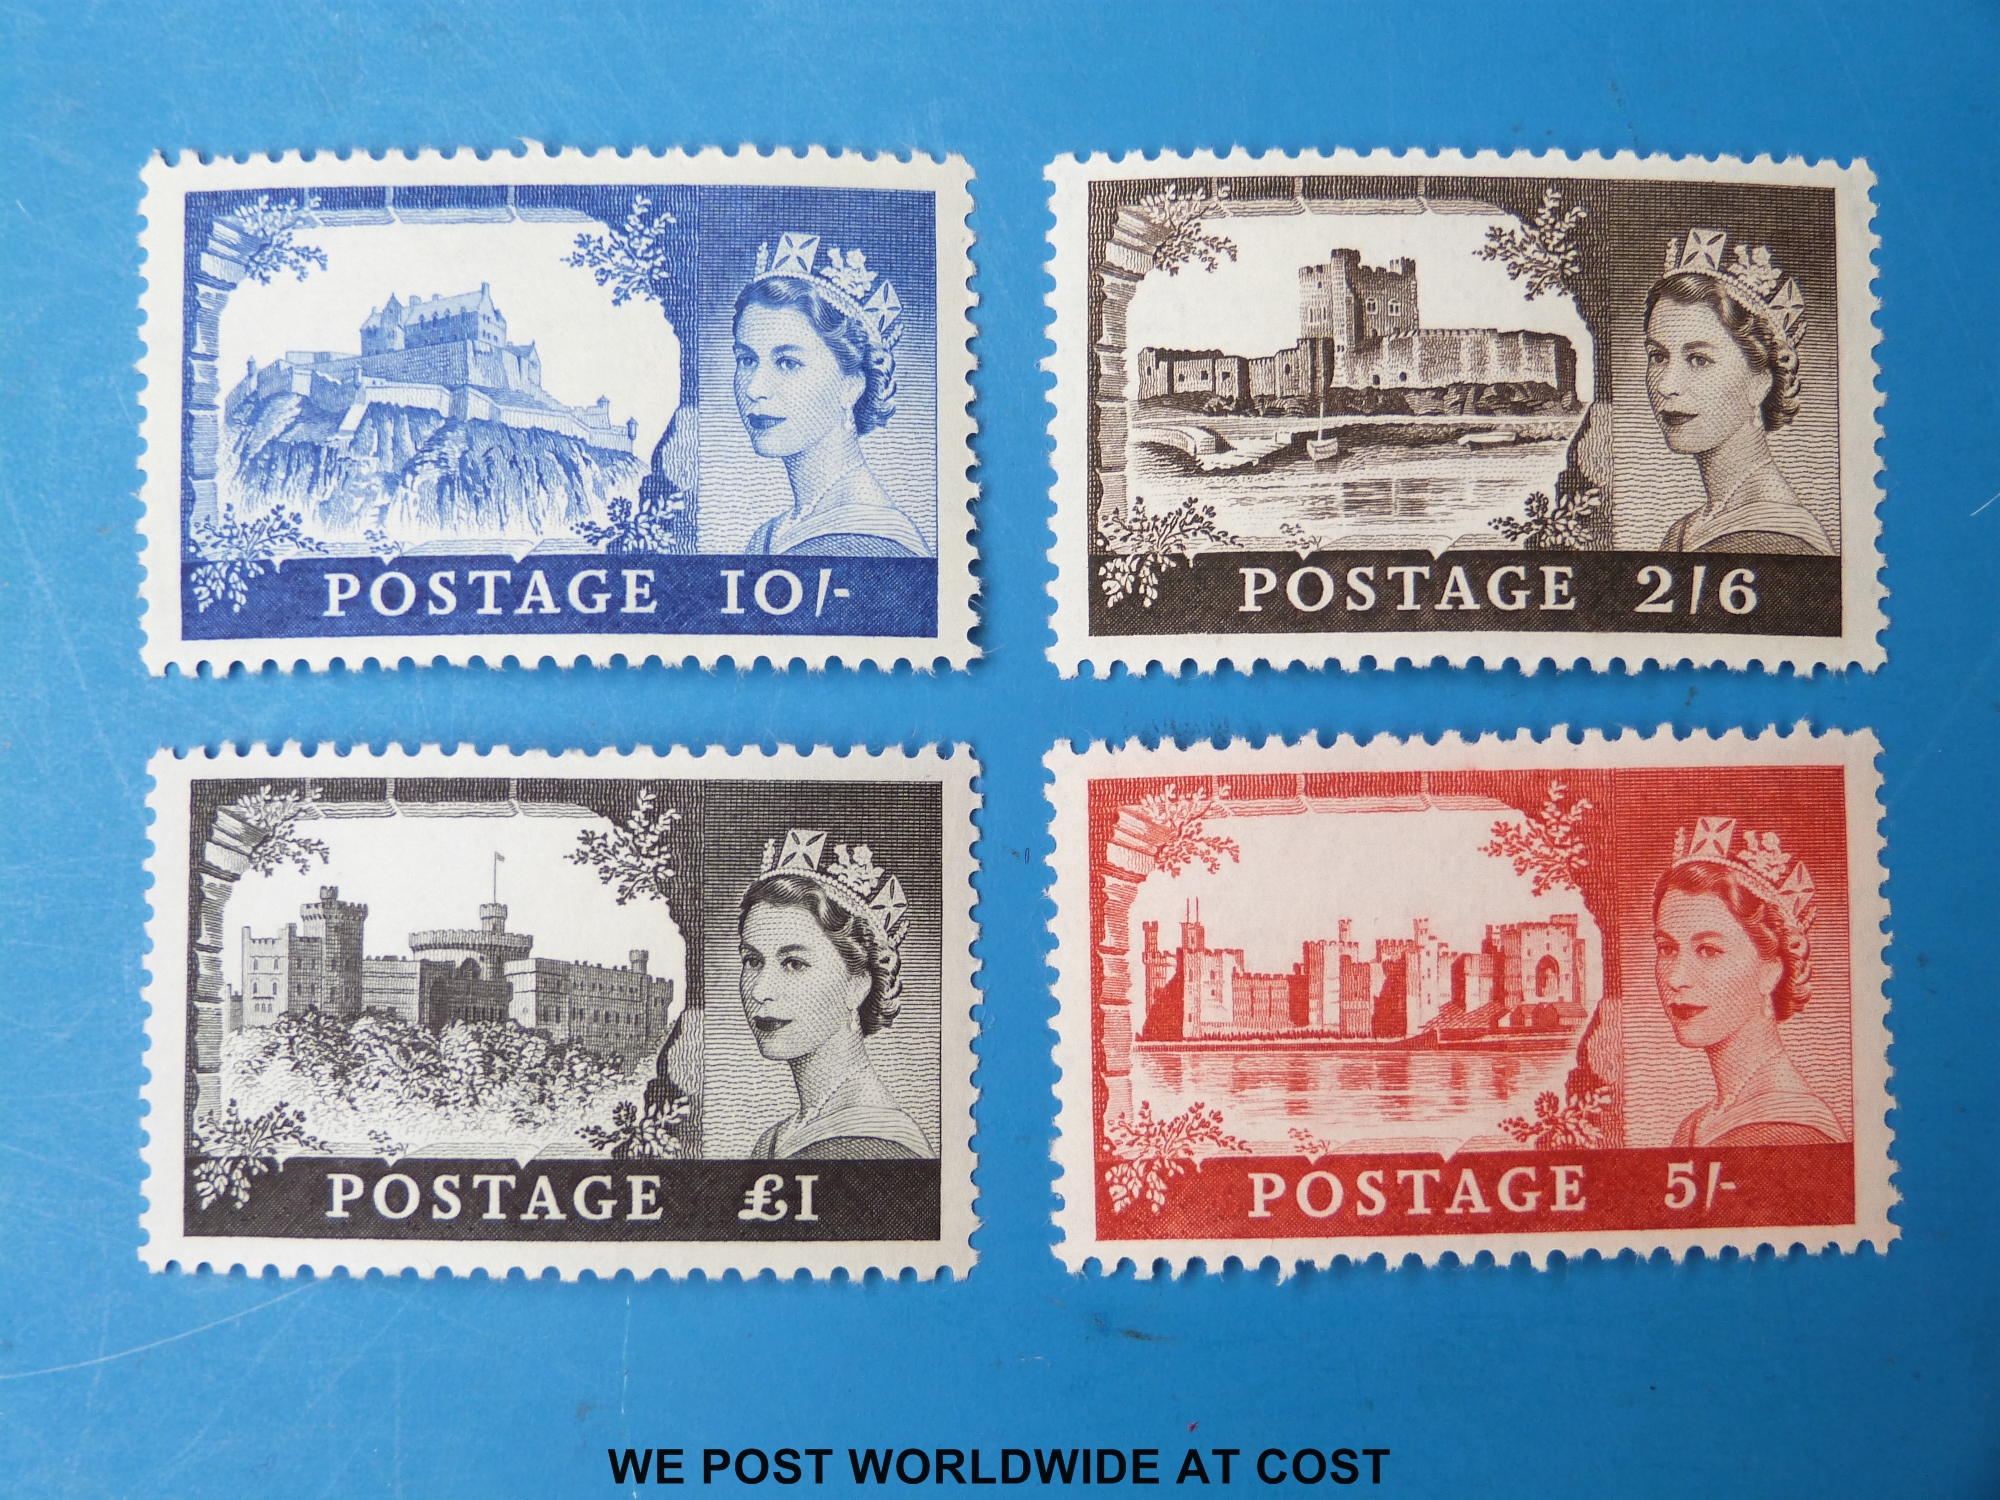 A mint set of GB Castle stamps late 1950's,